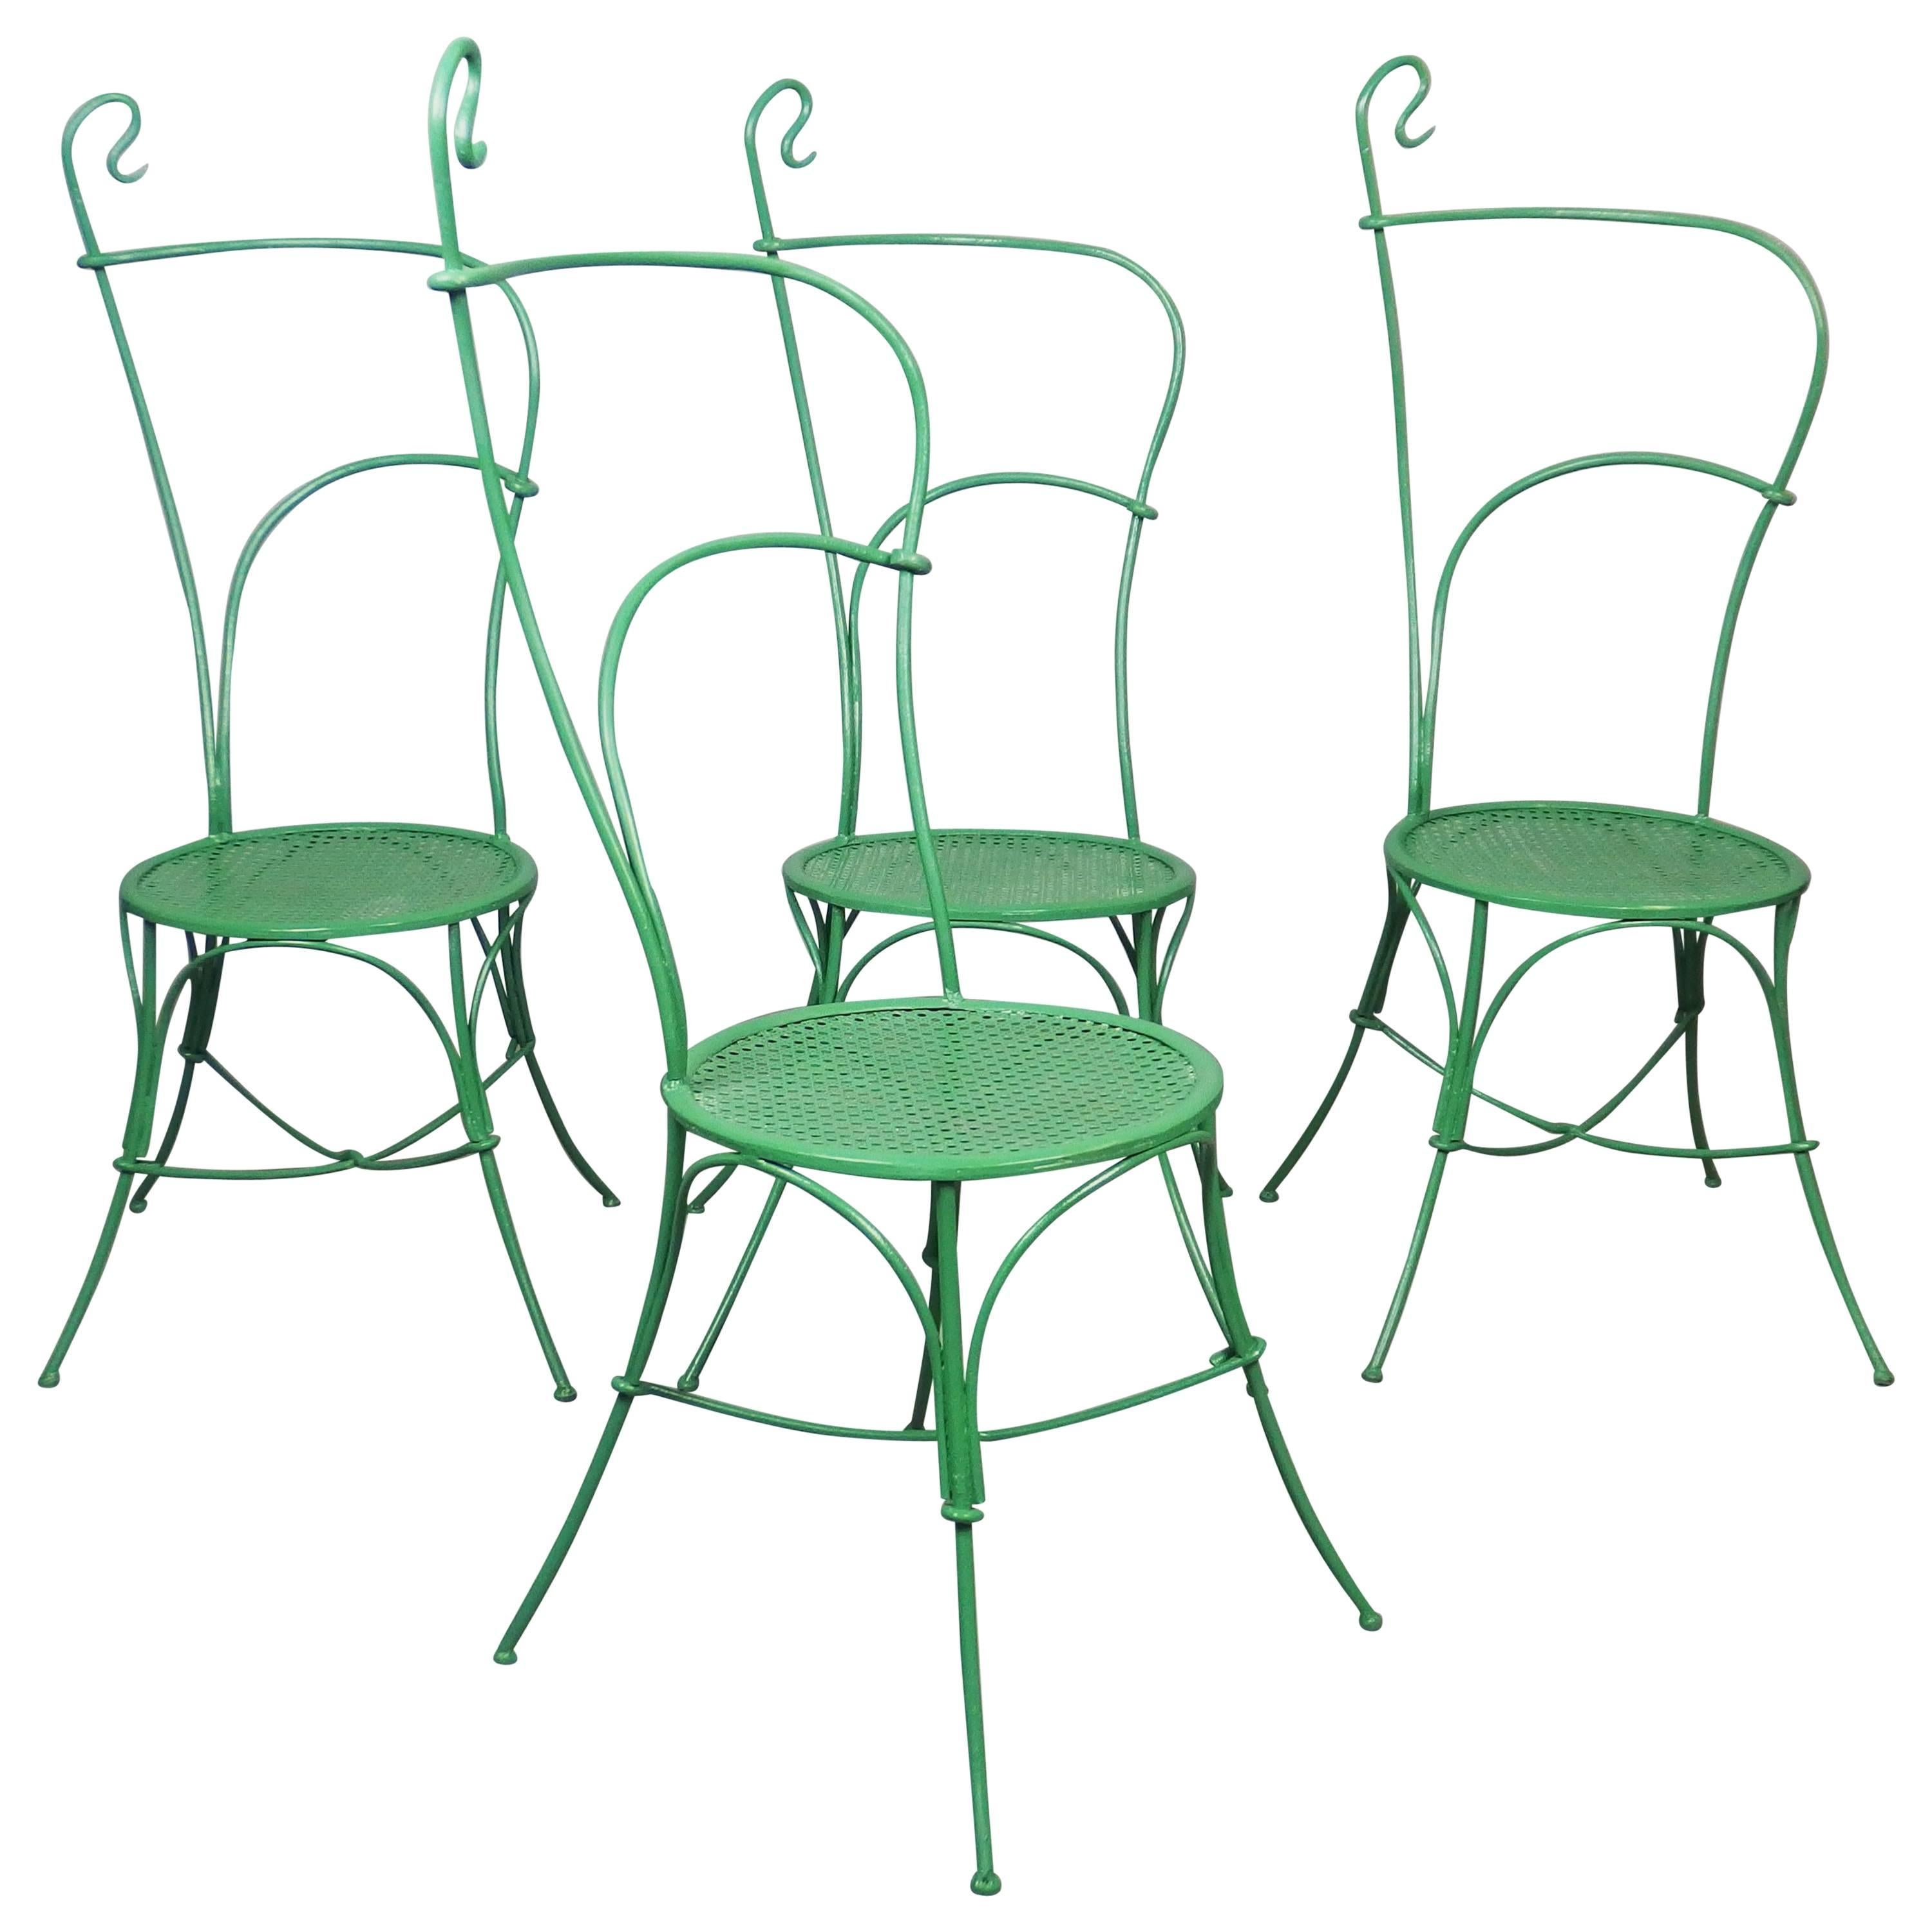 Rare set of four Art Nouveau garden chairs with a sybilline and voluptuous line reminding Horta architectural refinement.
The iron structure is green painted as it was originally and the metal seat is changed.